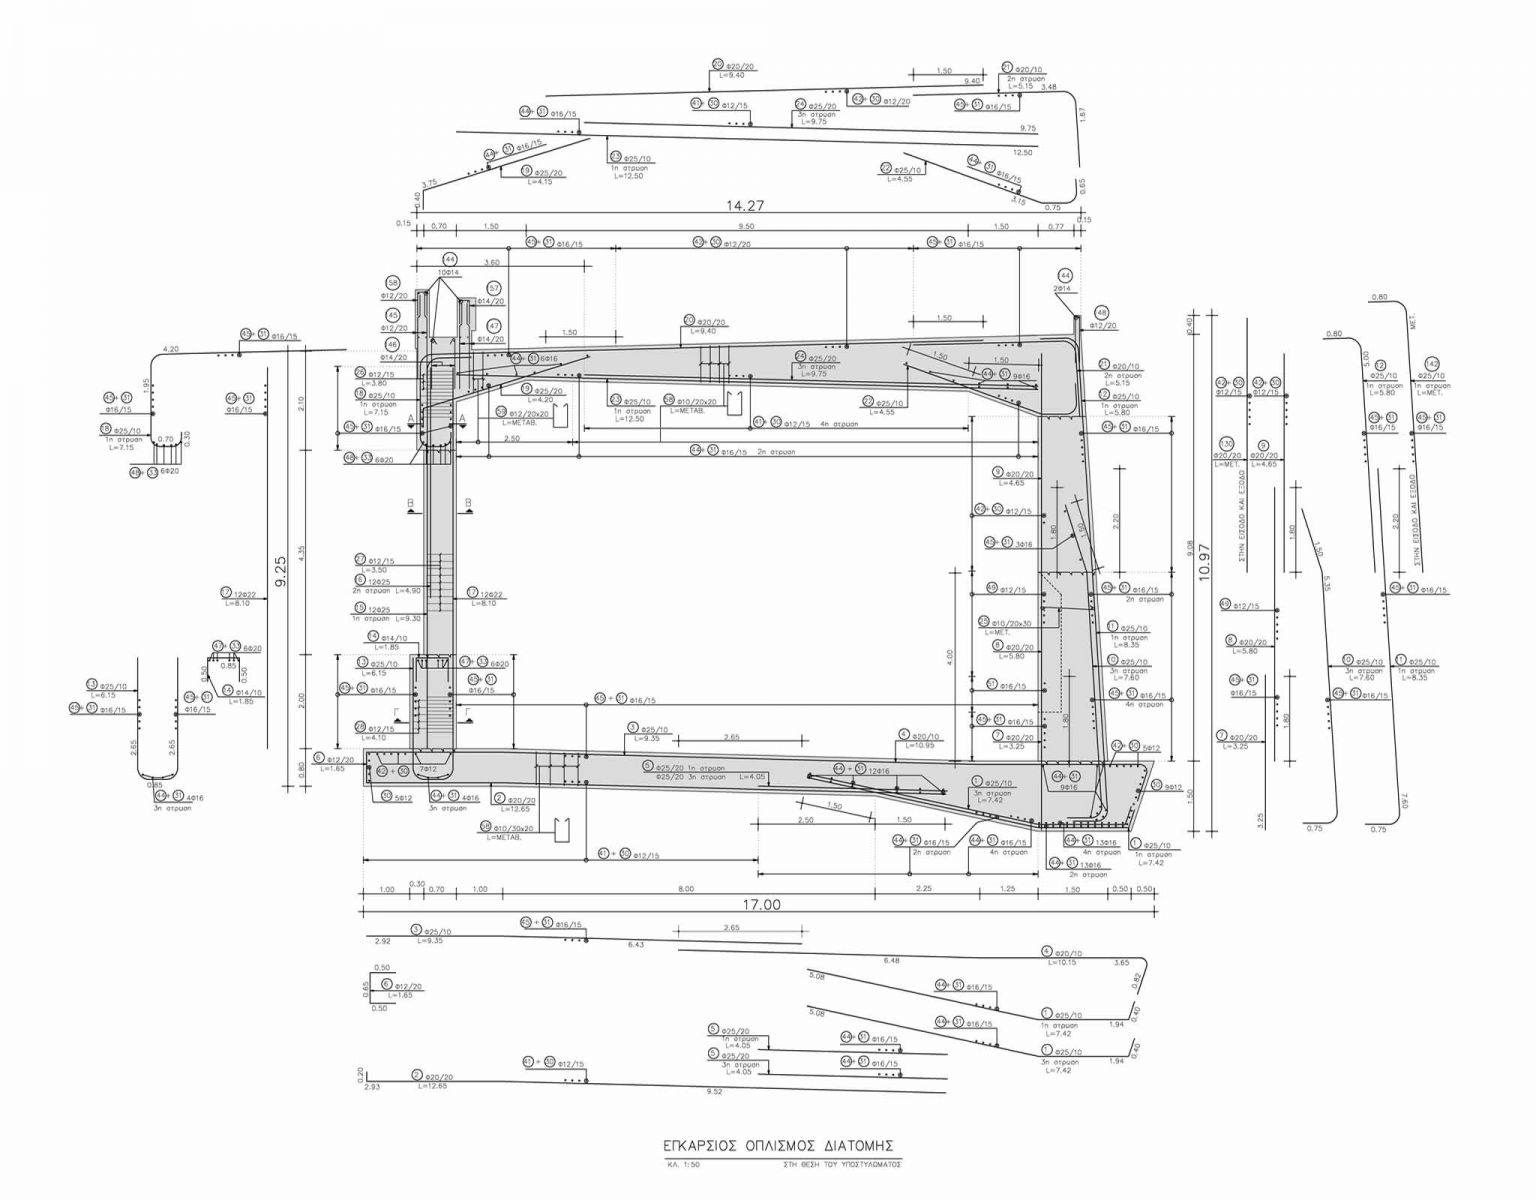 Section Reinforcement Drawing